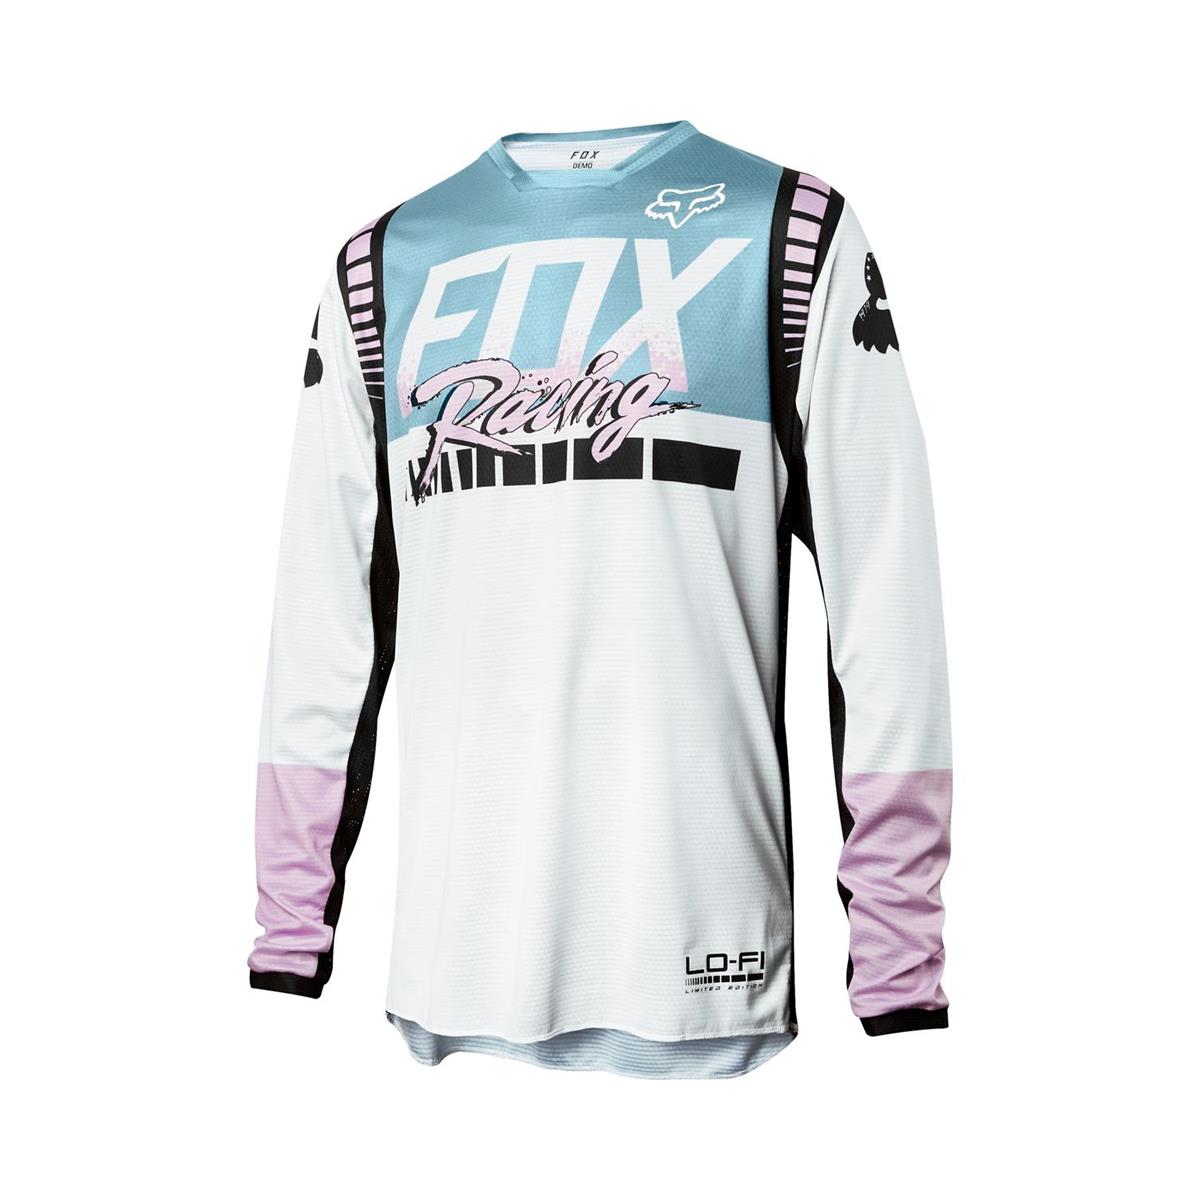 Fox Downhill Jersey Long Sleeve Demo LO-FI Limited Edition - White/Light Blue/Pink